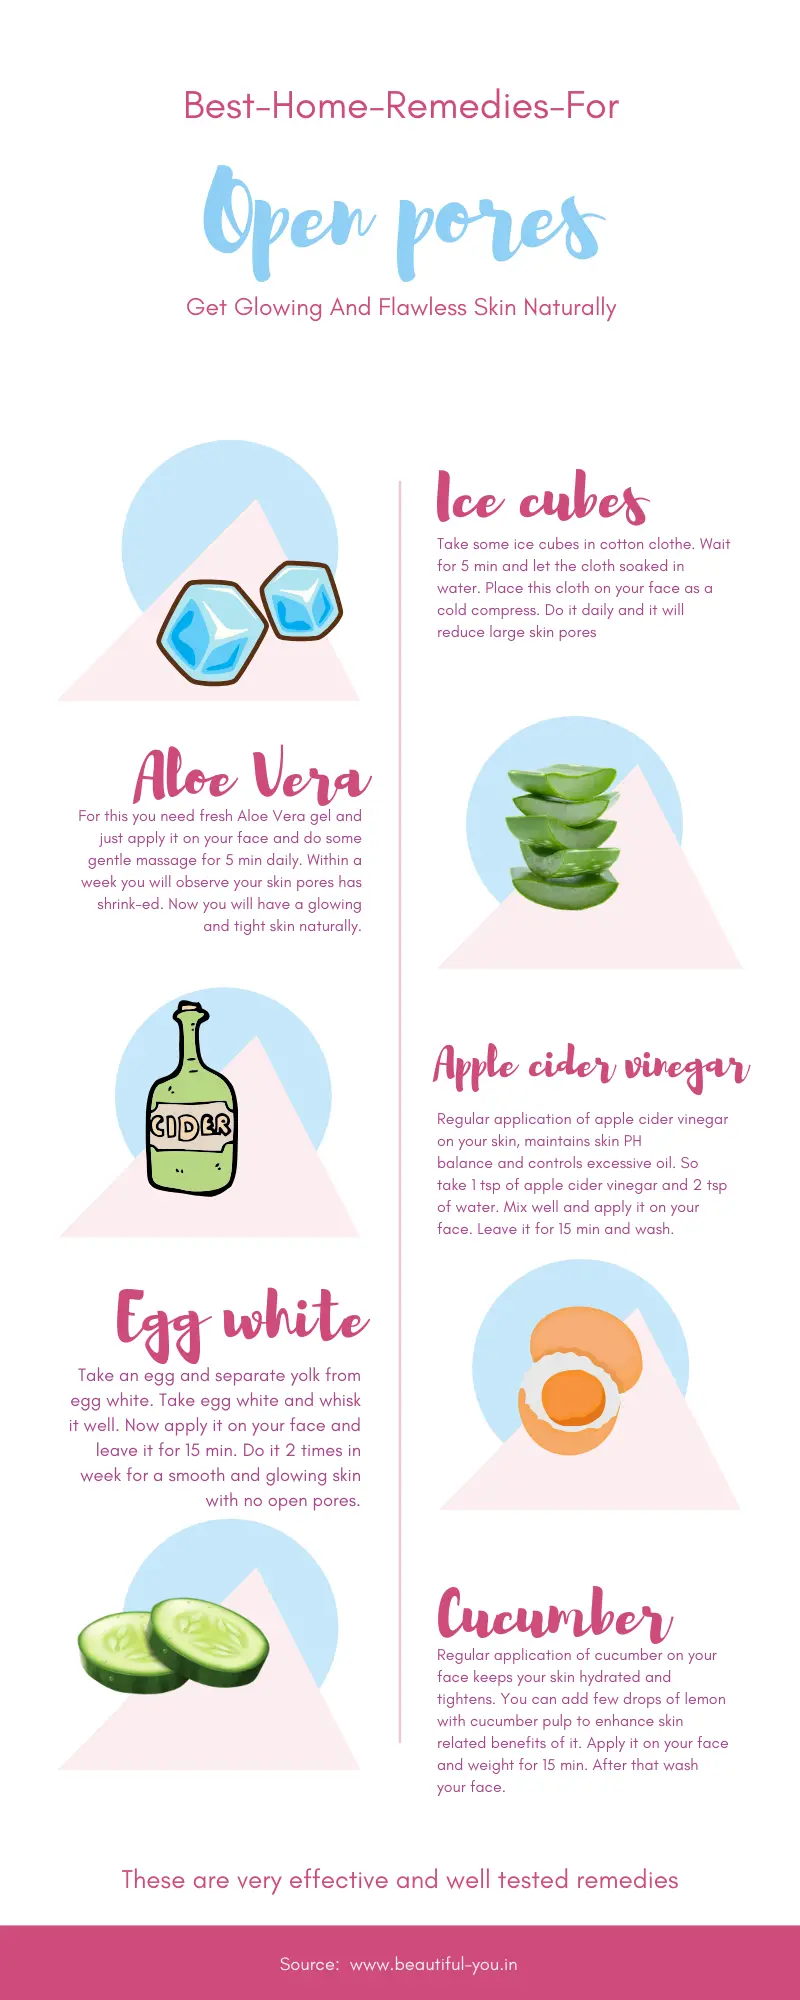 Home remedies for open pores